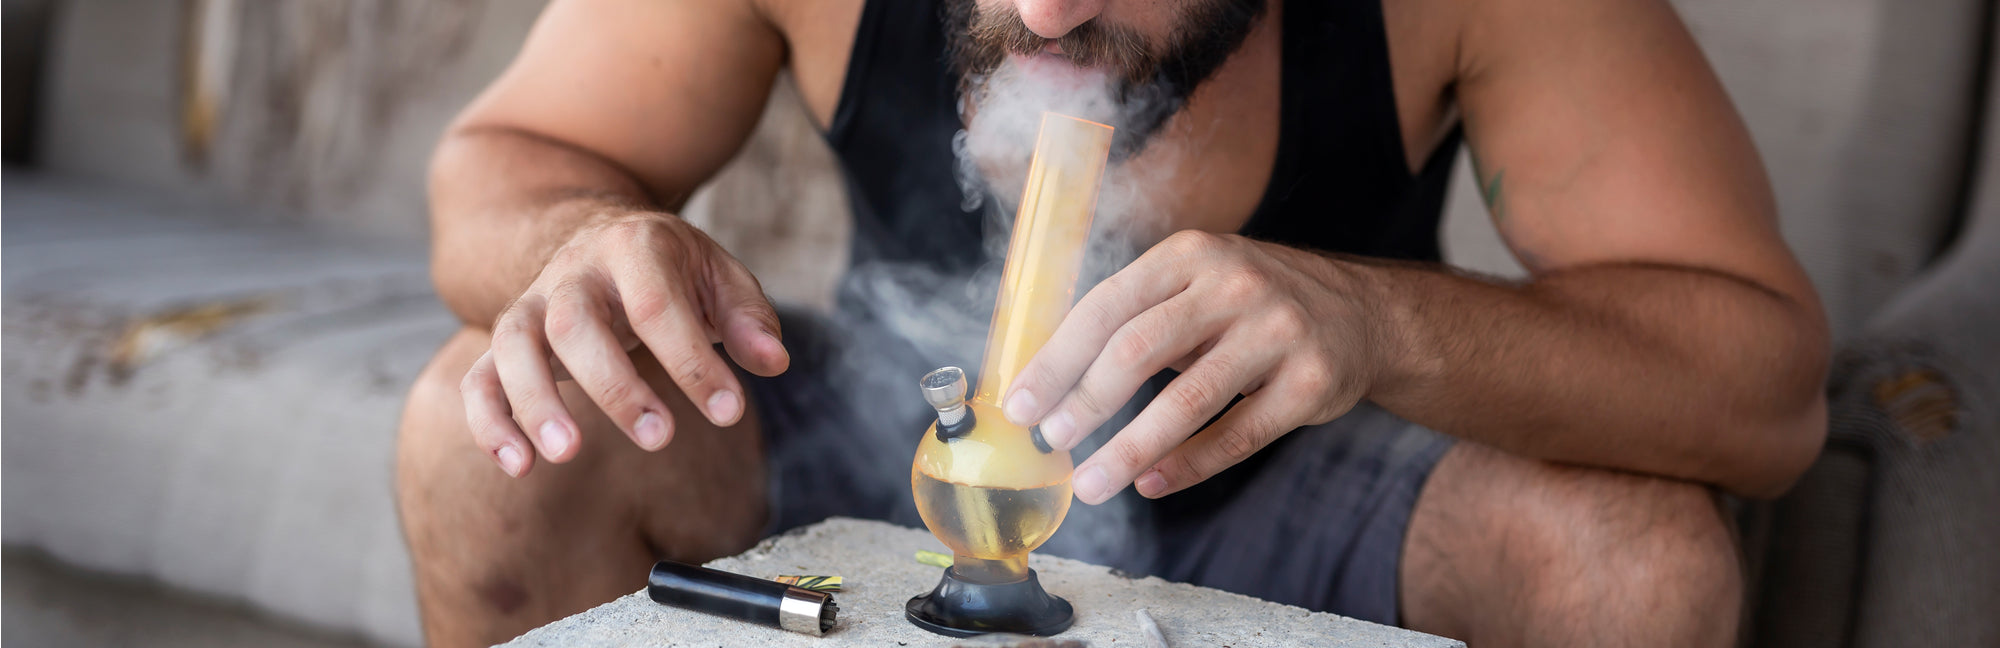 What to Look for When Buying a Cannabis Pipe: For Beginner to Experienced  Consumer